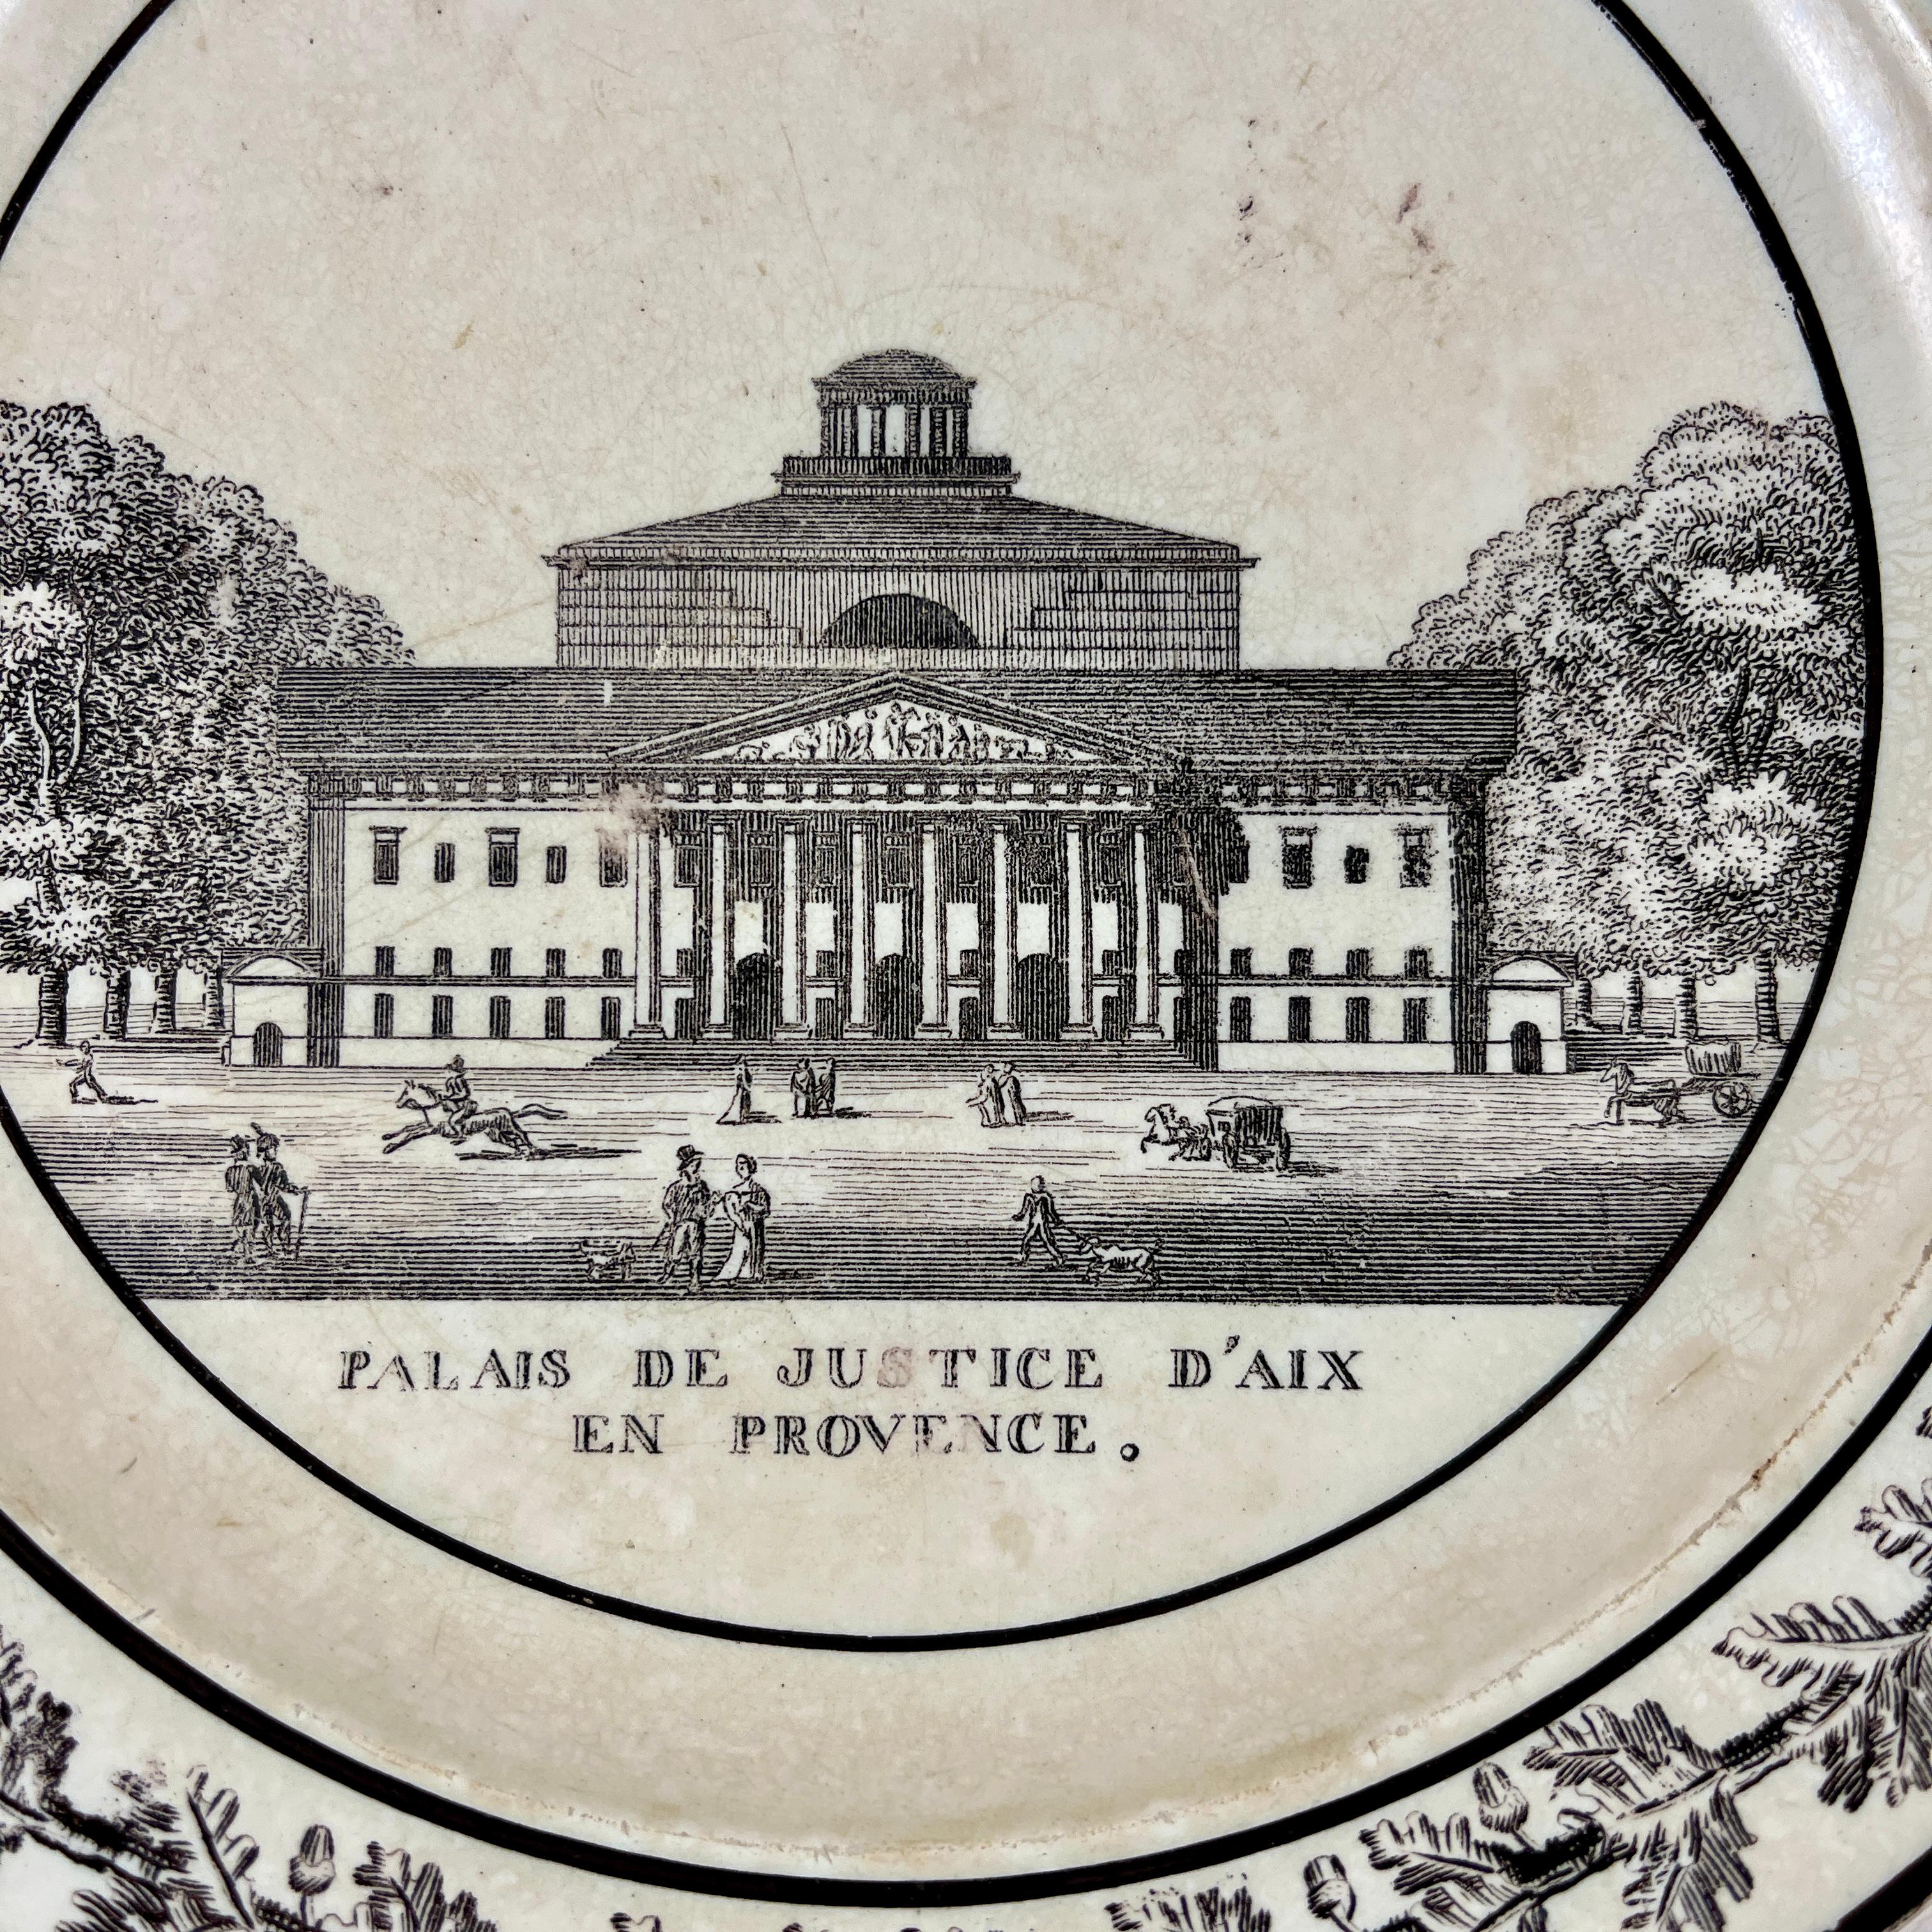 A French Neoclassical faïence transfer printed creamware plate produced by Montereau, Creil, circa 1824-1836.

A black transfer of an architectural image on a creamware body, depicting Le Palais De Justice d’Aix en Provence . The building is